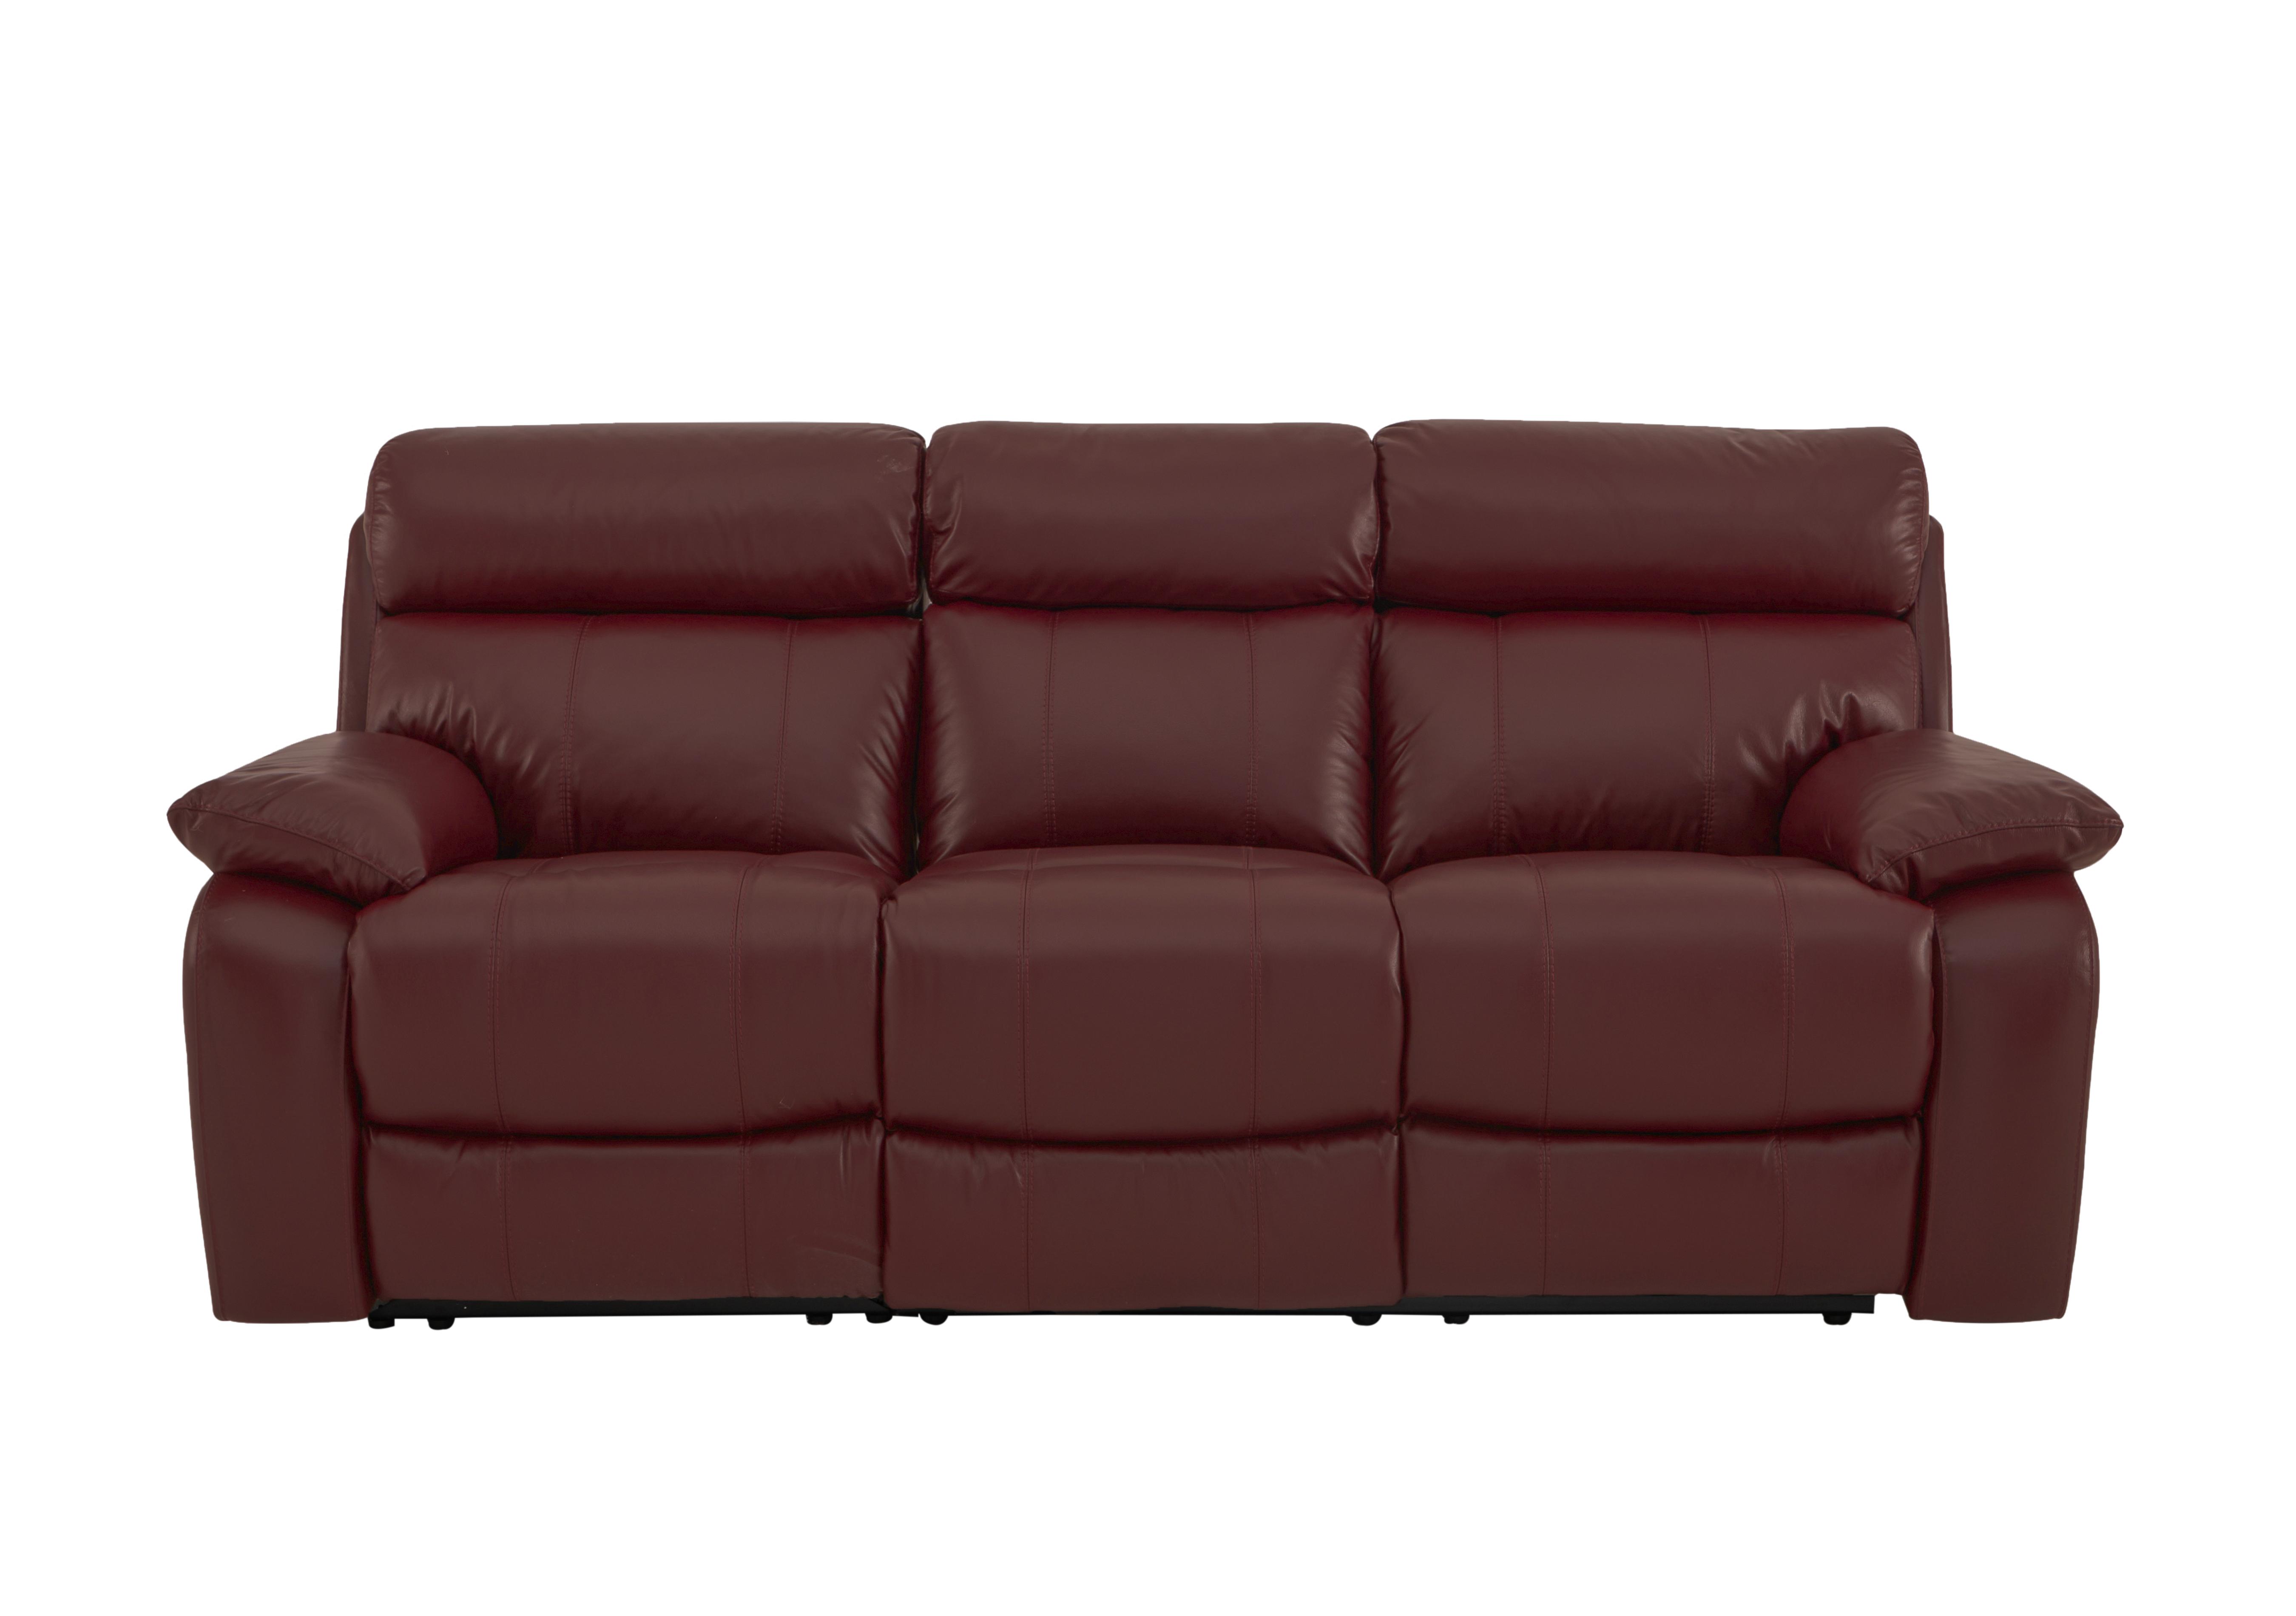 Moreno 3 Seater Leather Power Recliner Sofa with Power Headrests in An-751b Burgundy on Furniture Village